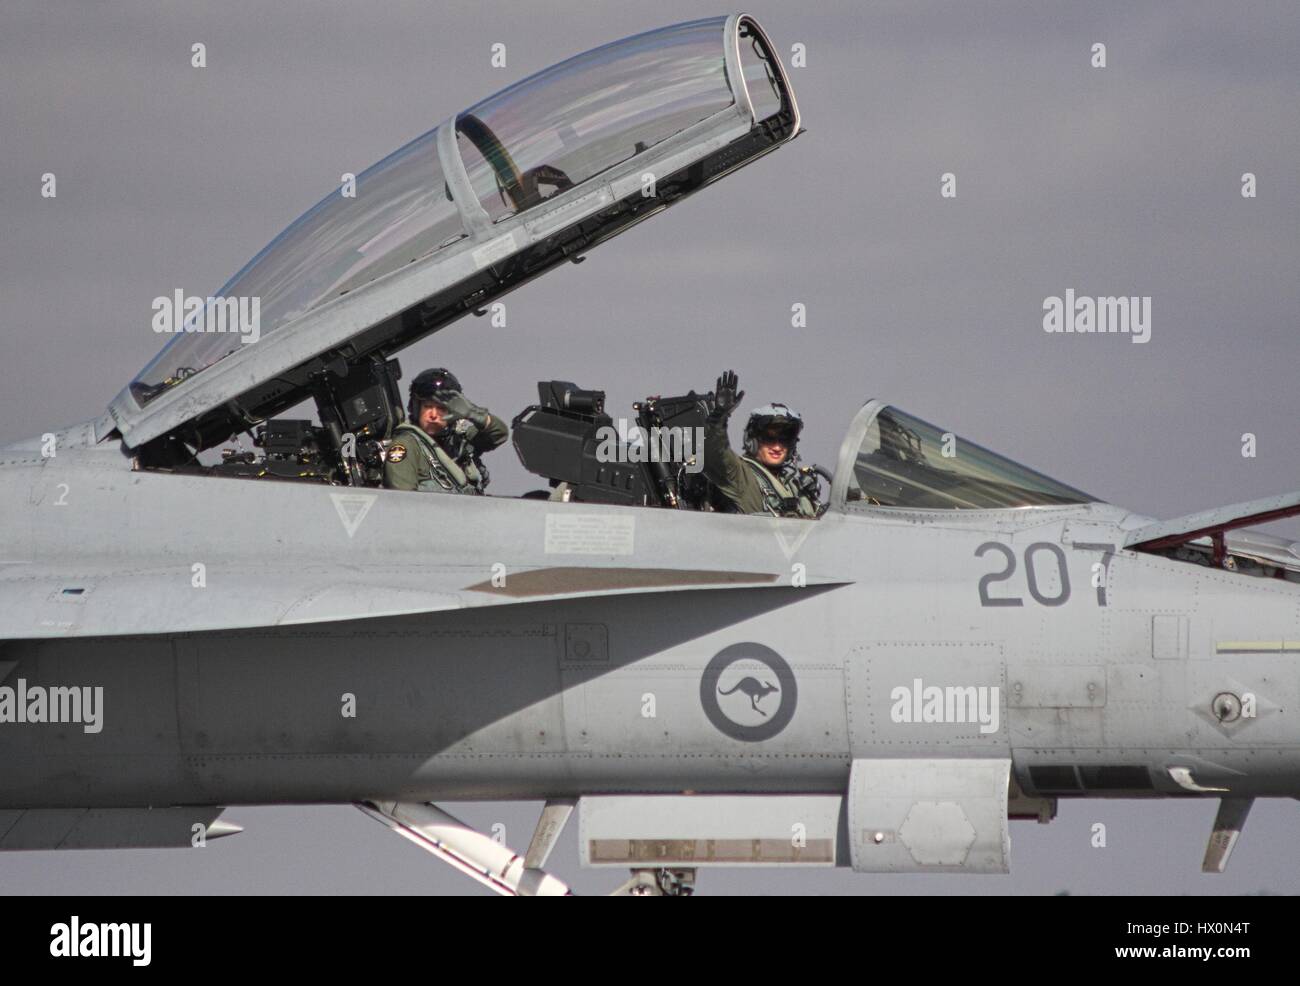 F/A-18F Super Hornet on the runway at Avalon airshow, Australia, canopy open, pilots waving. Stock Photo